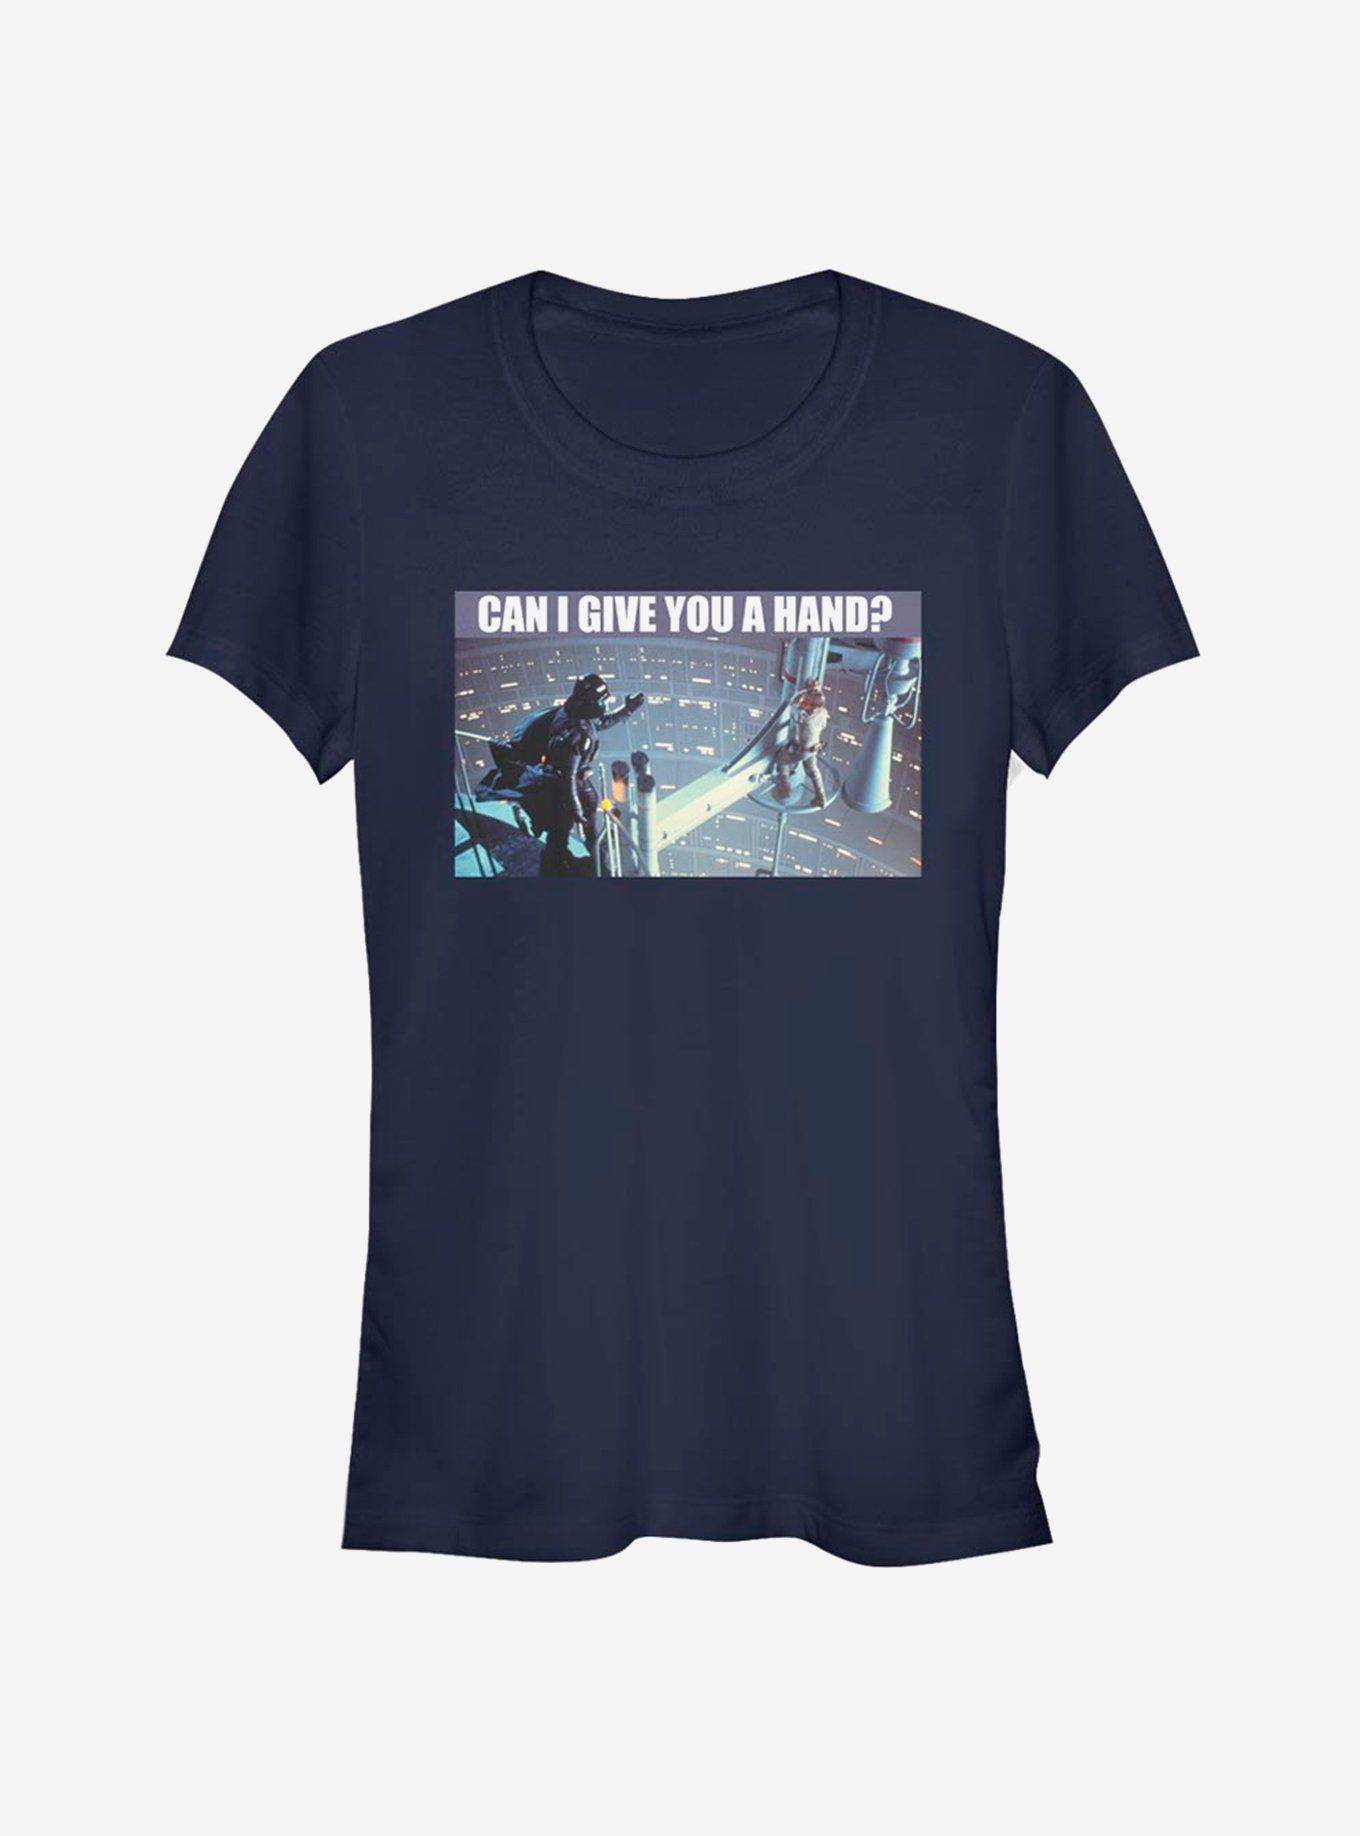 Star Wars Can I Give You A Hand Girls T-Shirt, NAVY, hi-res